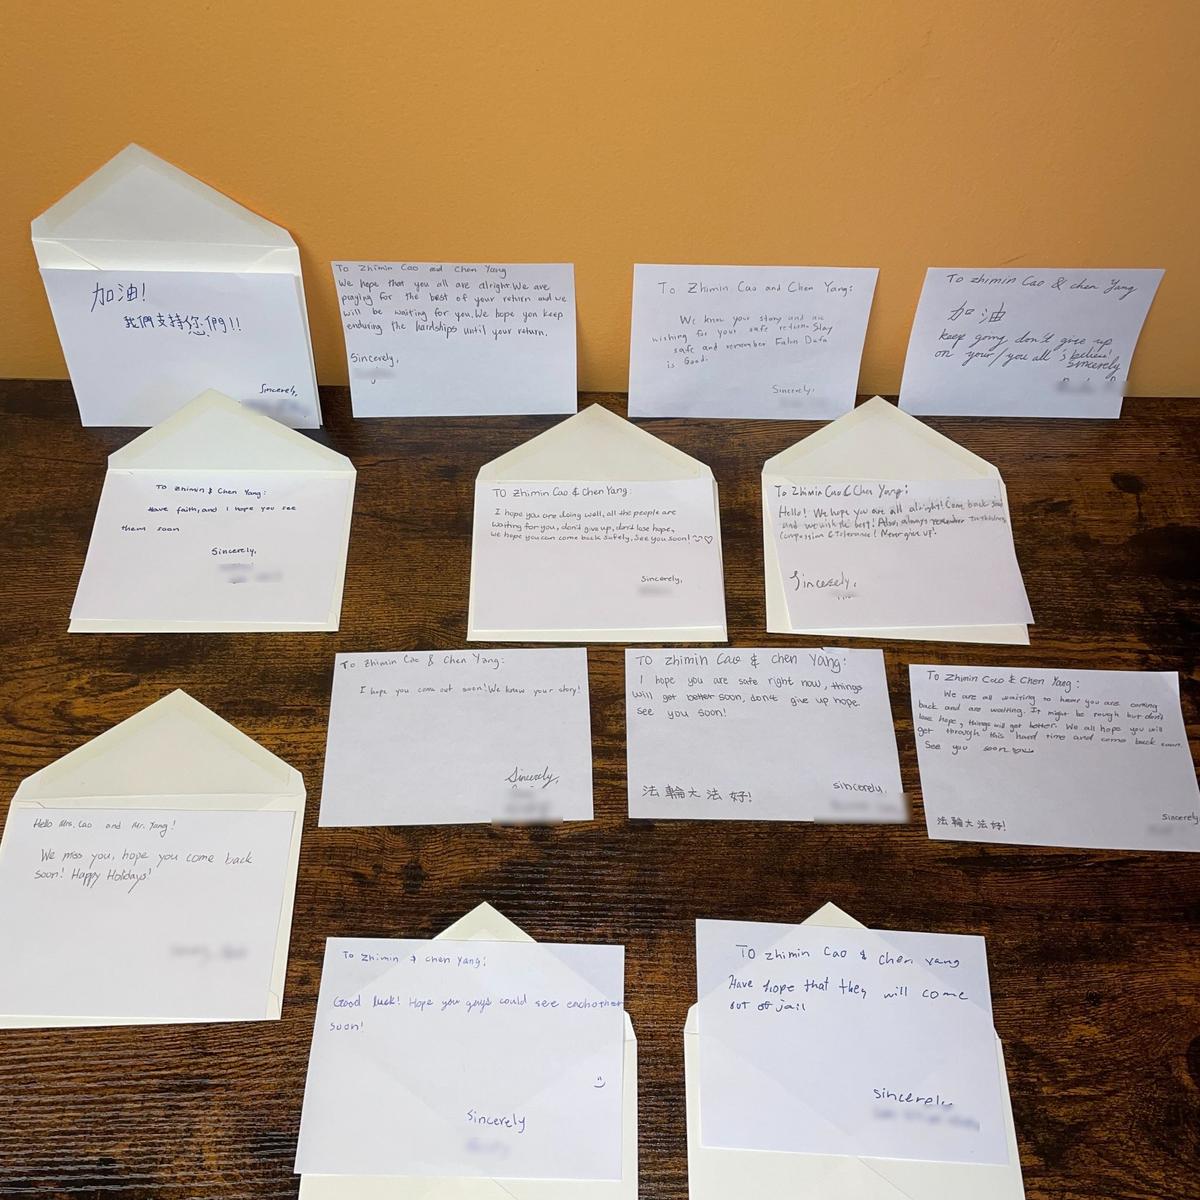 Grace Chen Fayuan’s classmates wrote over a dozen letters to her parents, who are detained in China. (<a href="https://faluninfo.net/yang-chen-and-zhimin-cao/">Courtesy of Falun Dafa Information Center</a>)